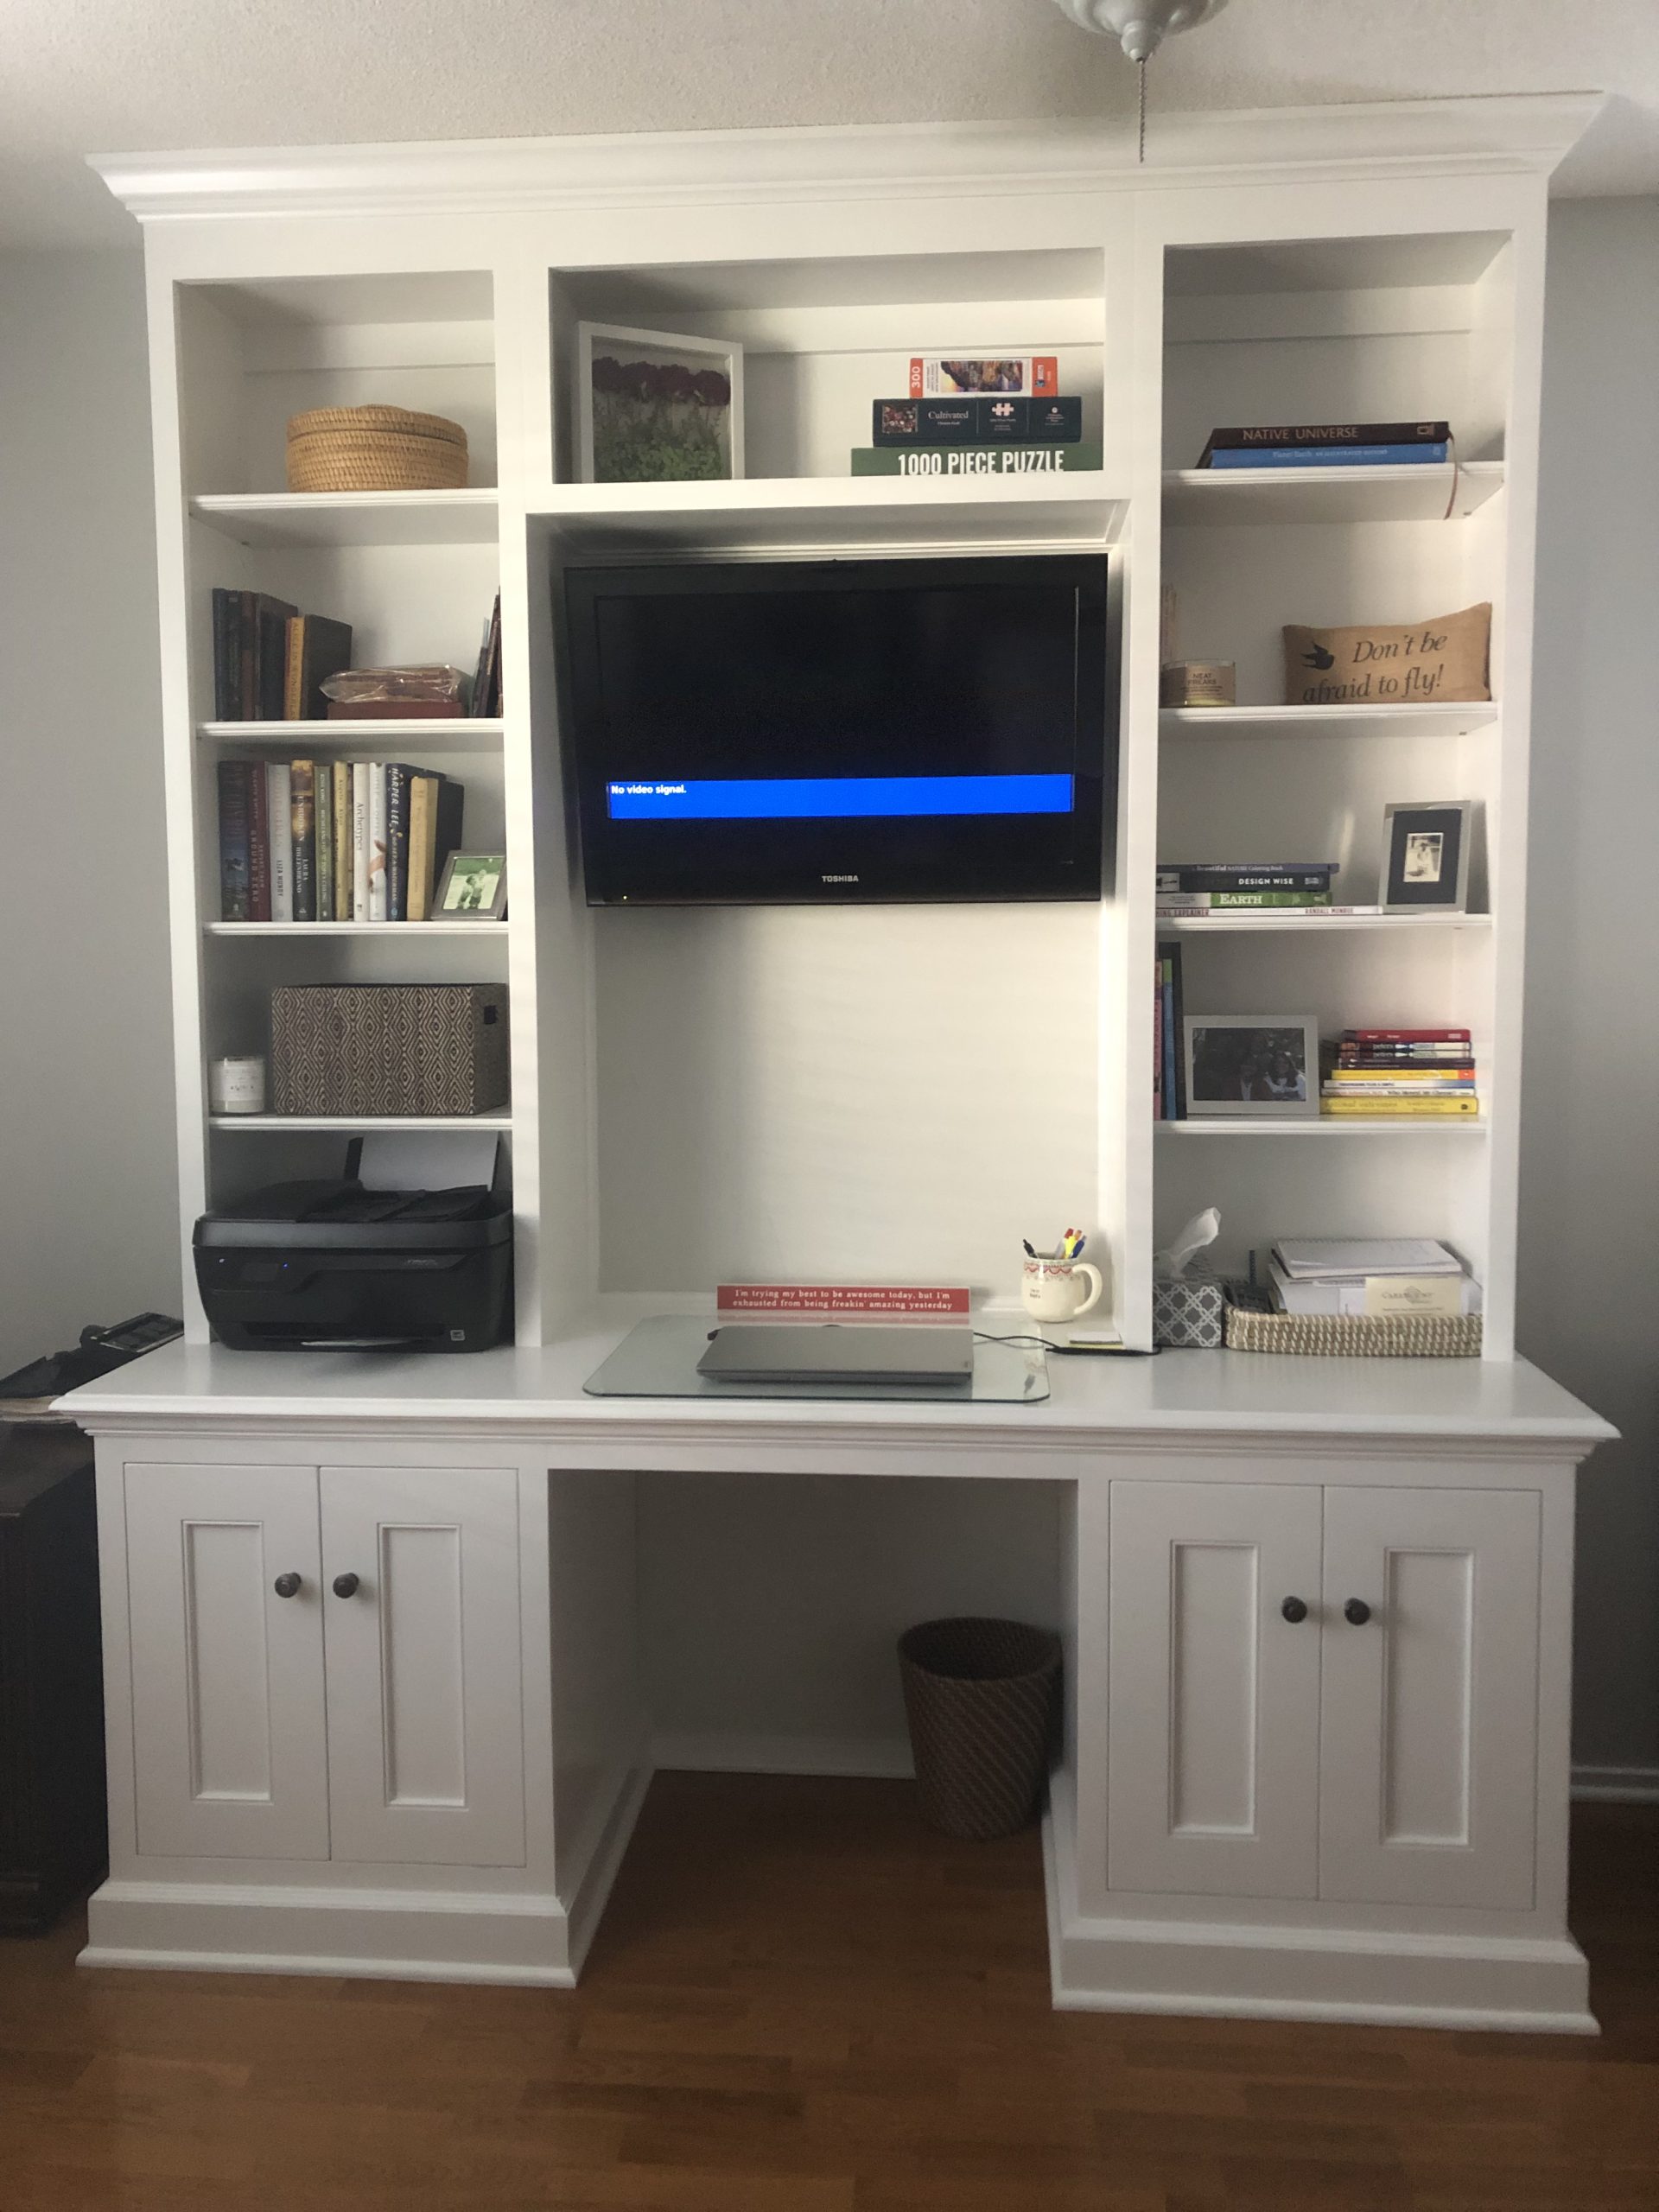 Home office wall unit with space for a monitor, printer, laptop. with storage below and book or display shelves above.